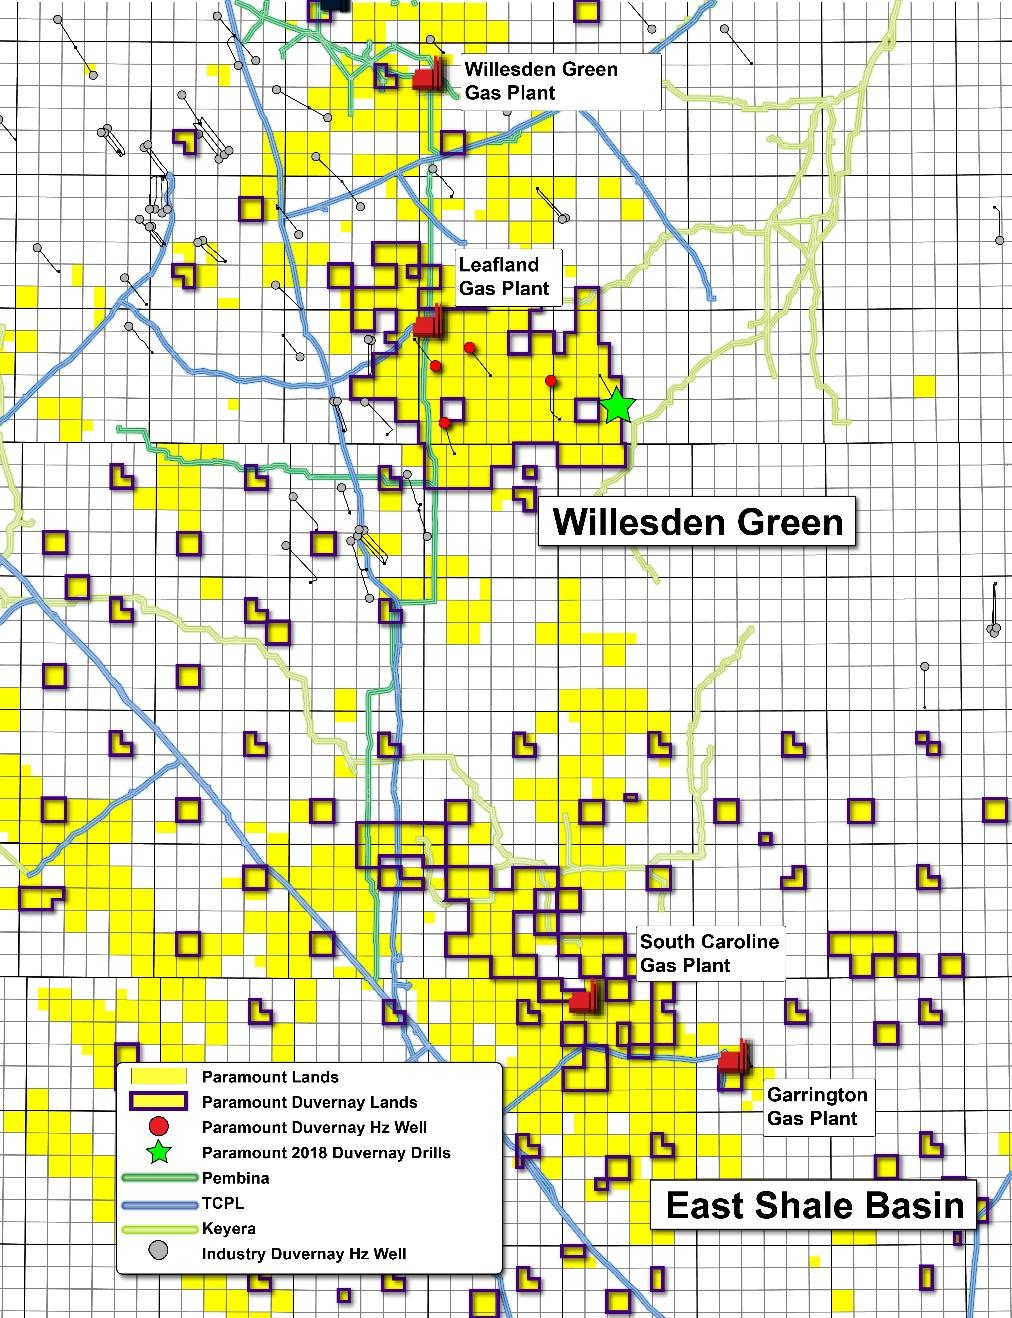 East Shale Basin, as well as Cardium, Glauconite and Ellerslie rights and approximately 180,000 net acres of fee simple lands across these resource plays.